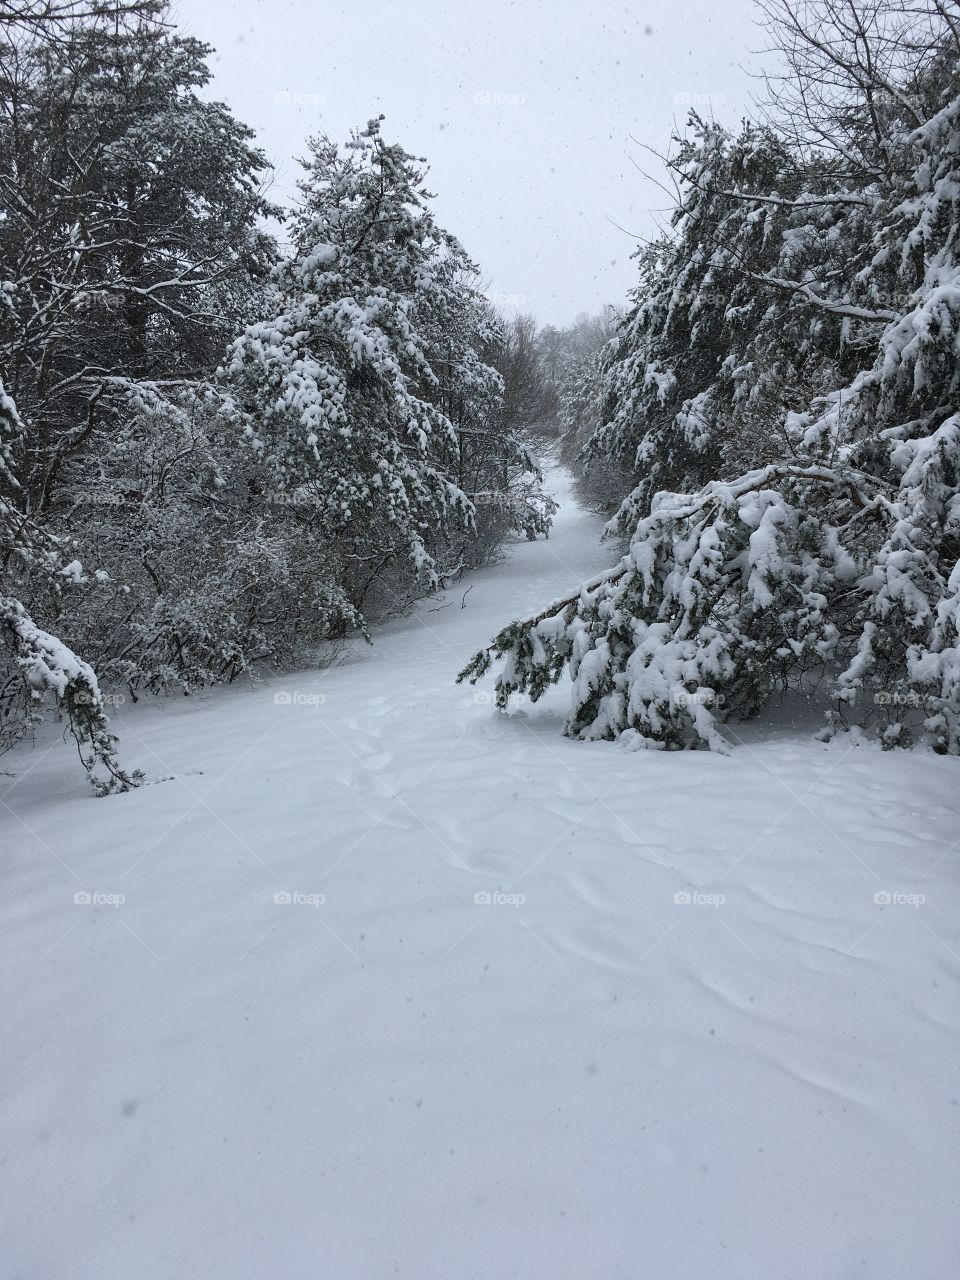 Take a stroll through the new fallen snow down this path in the woods. The wet, spring snow hung heavily on the tree’s branches.